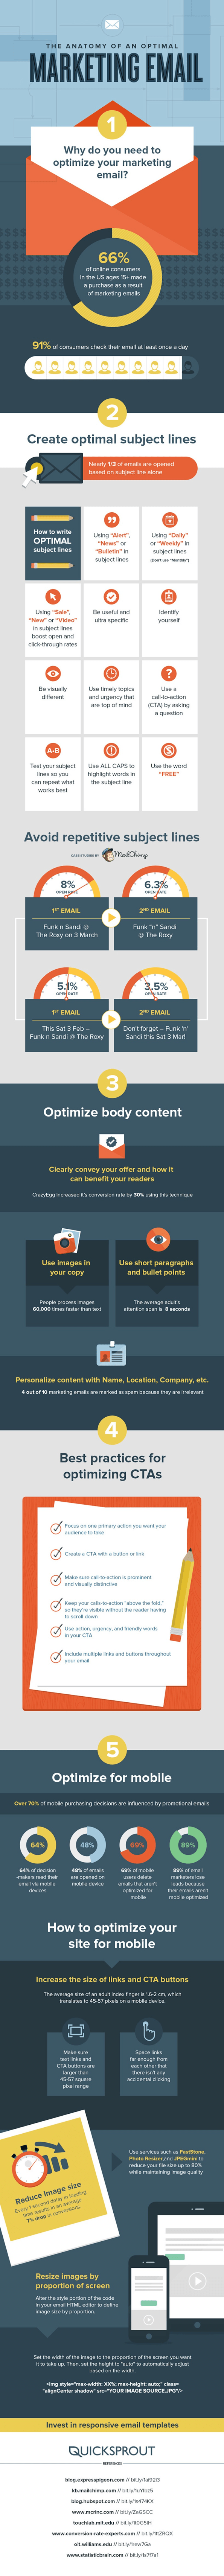 The Essential Elements of Email Marketing Optimization Infographic Image